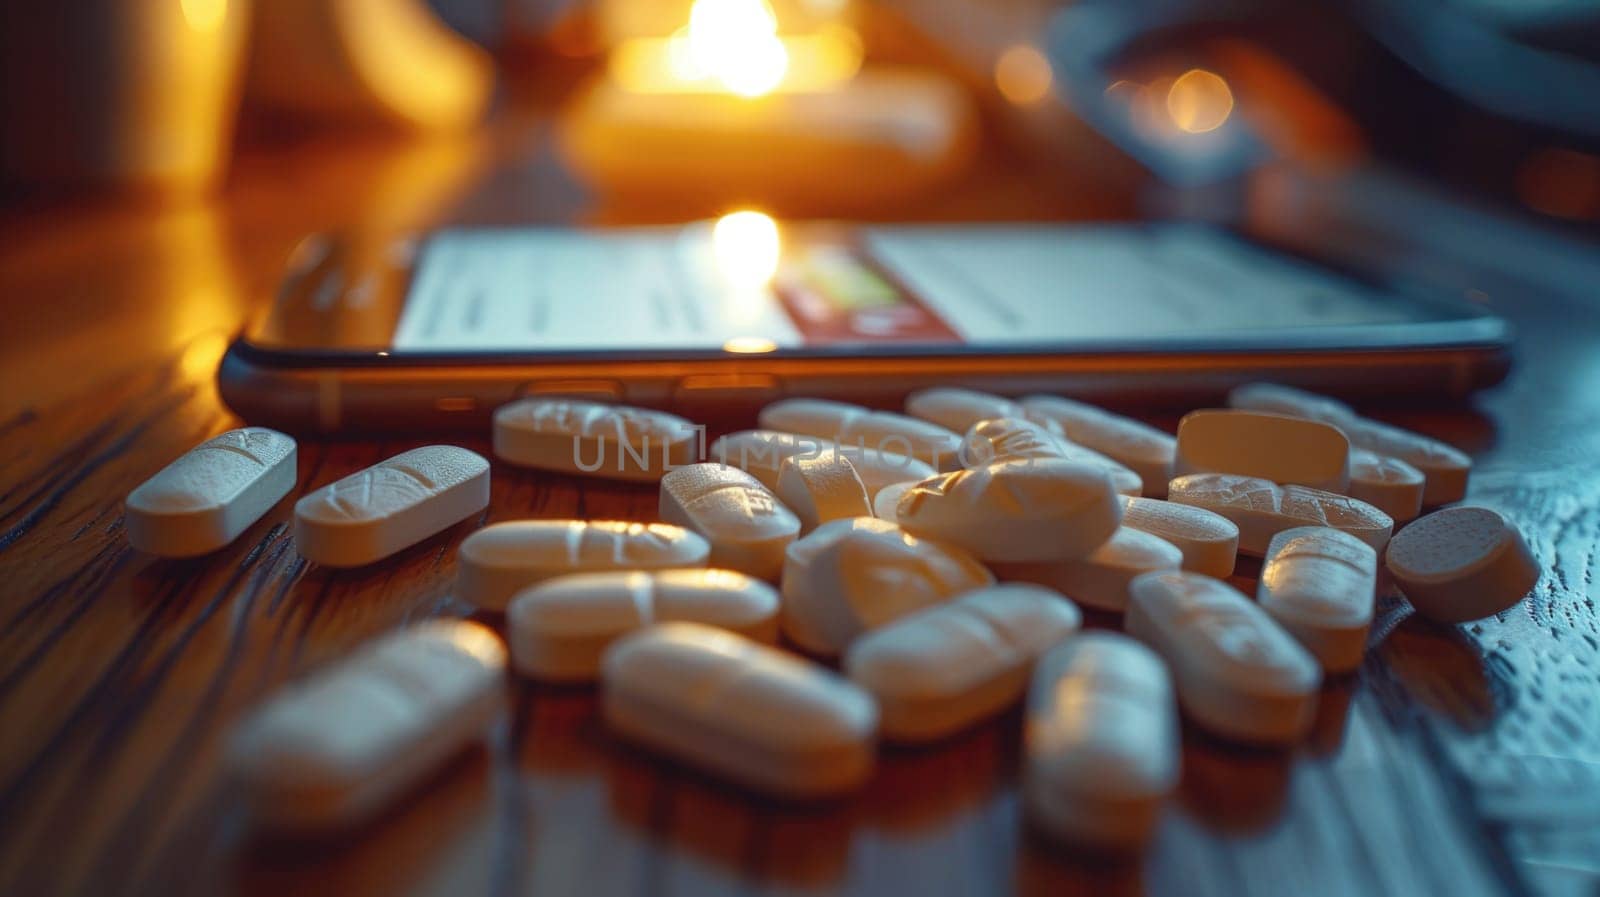 Close up of prescription pills arranged neatly on a table next to a cell phone. The pills are various colors and shapes.